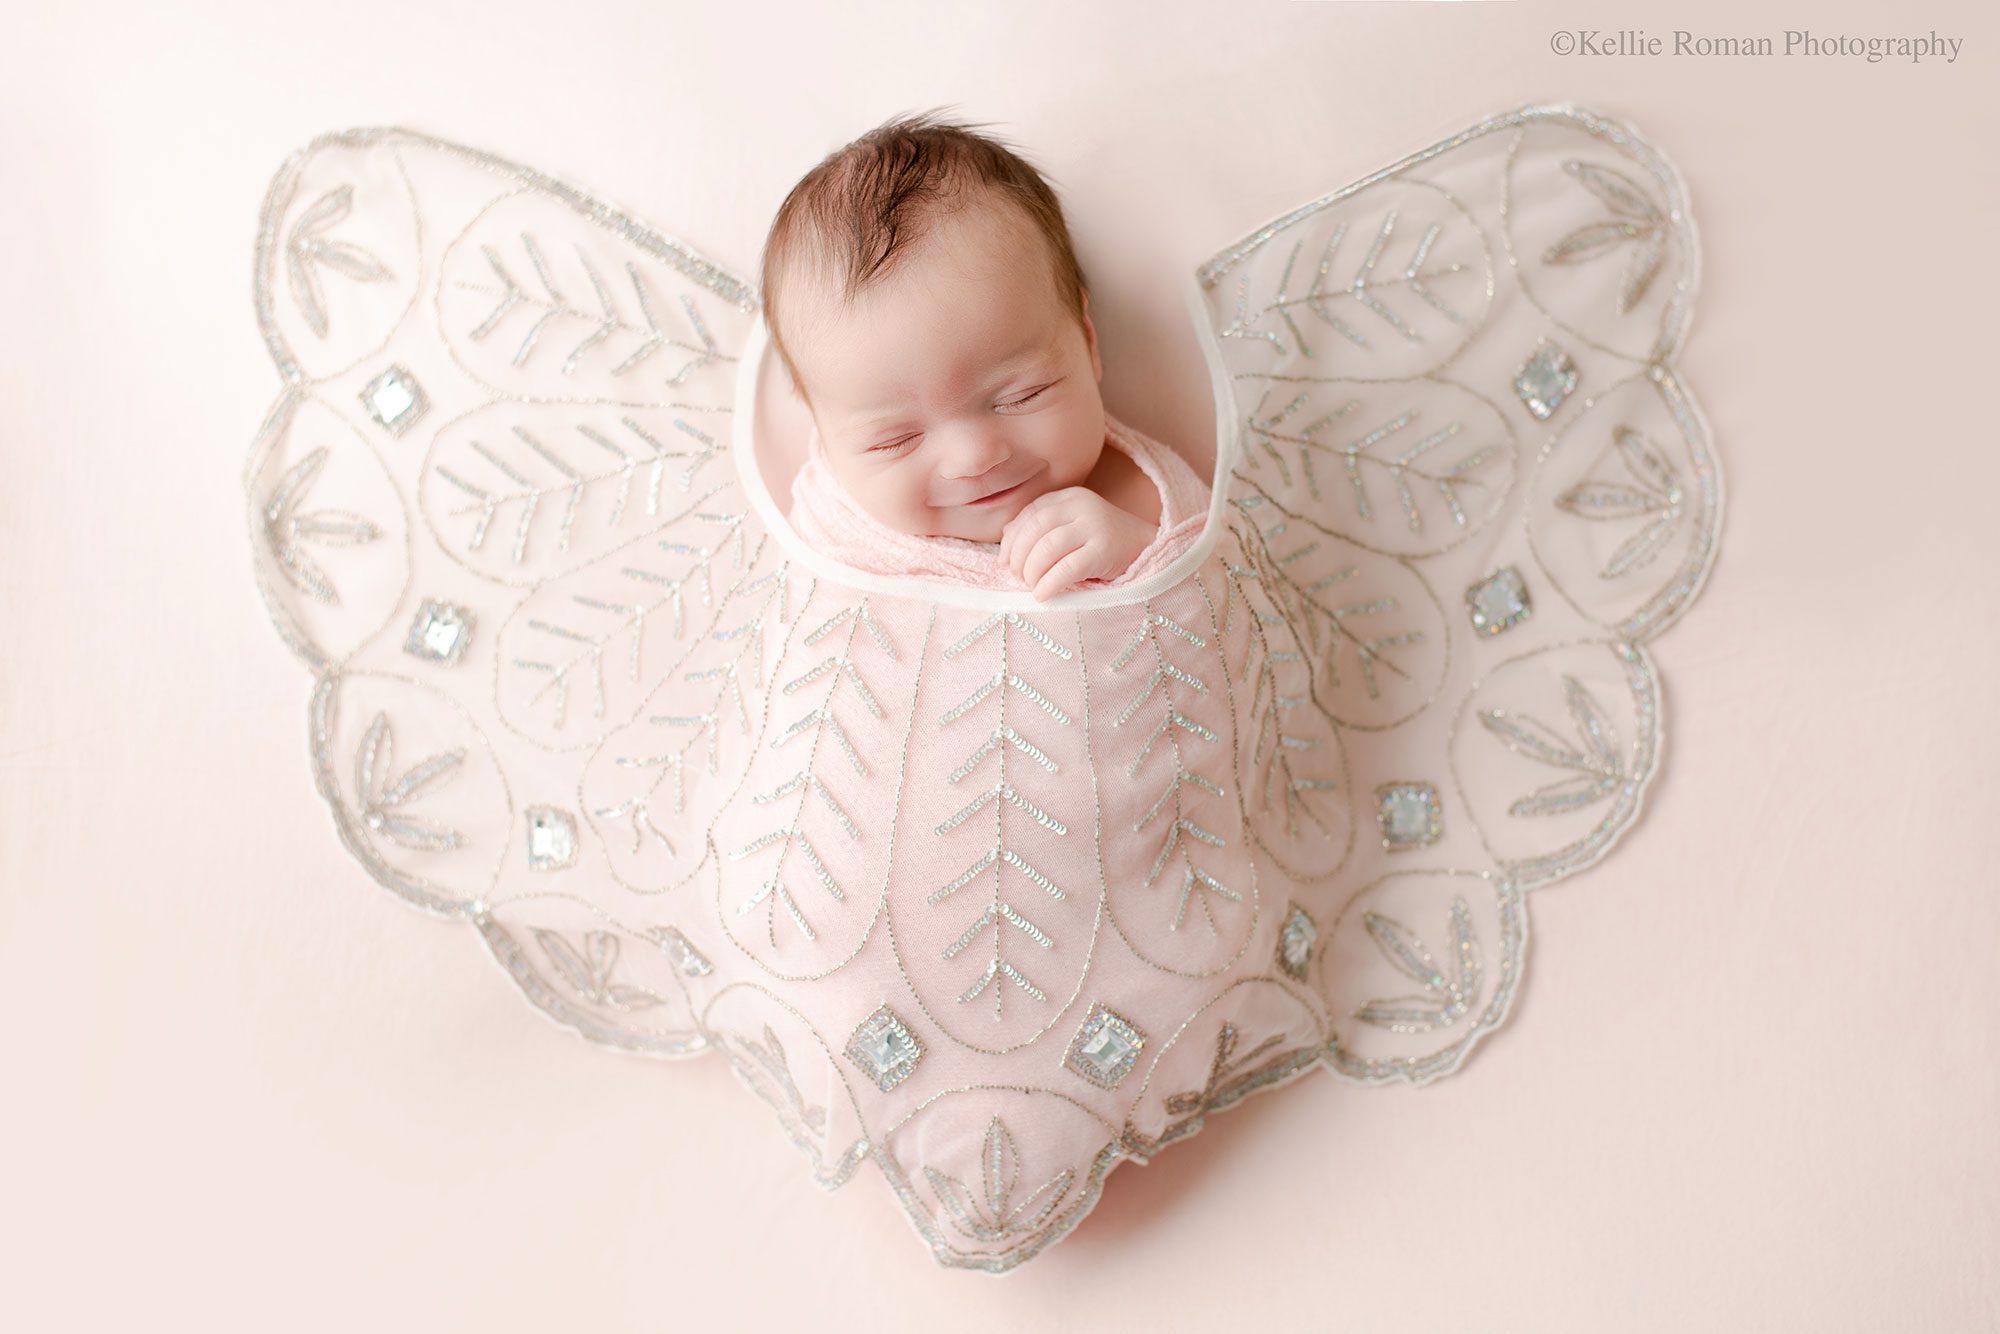 experienced Milwaukee newborn photographer. newborn baby girl is asleep on her back onto of light pink fabric. she's swaddled in a light pink swaddle, with a sheer decorative fabric over her. the fabric is a pattern of silver sequins. the baby is smiling.